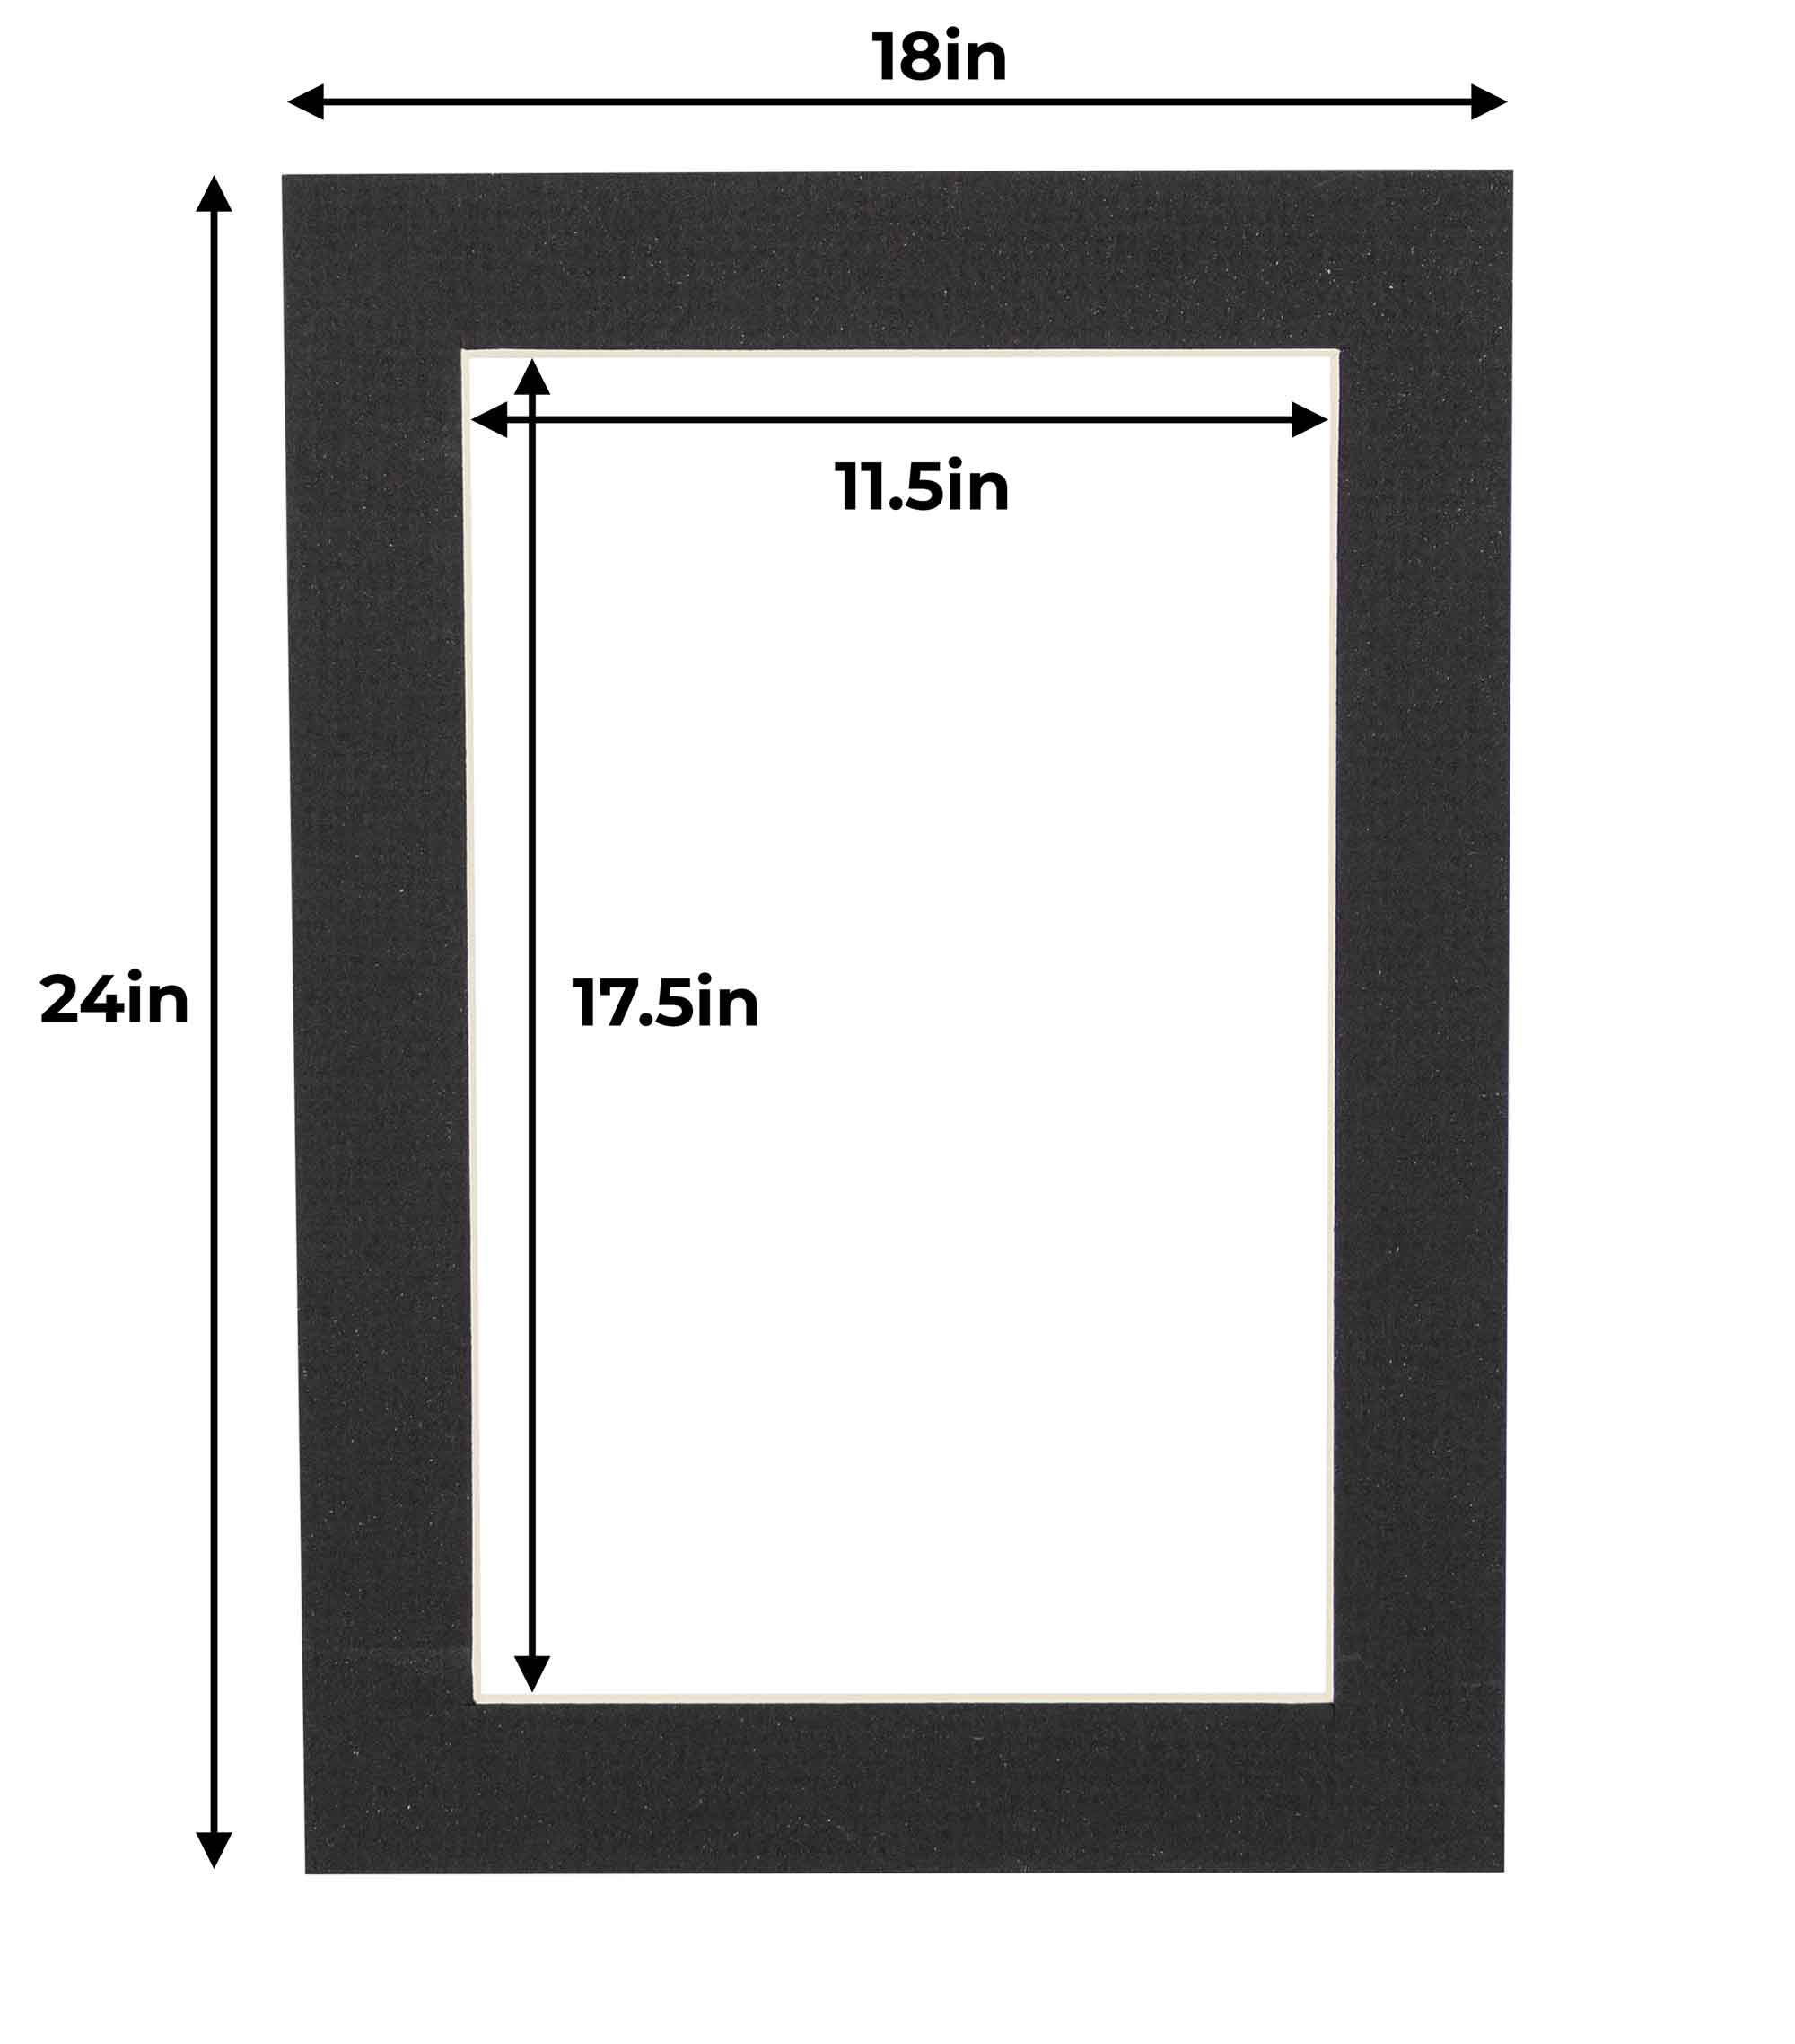 11x14 Mat for 12x16 Frame - Precut Mat Board Acid-Free Show Kit with  Backing Board, and Clear Bags Black 11x14 Photo Matte Made to Fit a 12x16  Picture